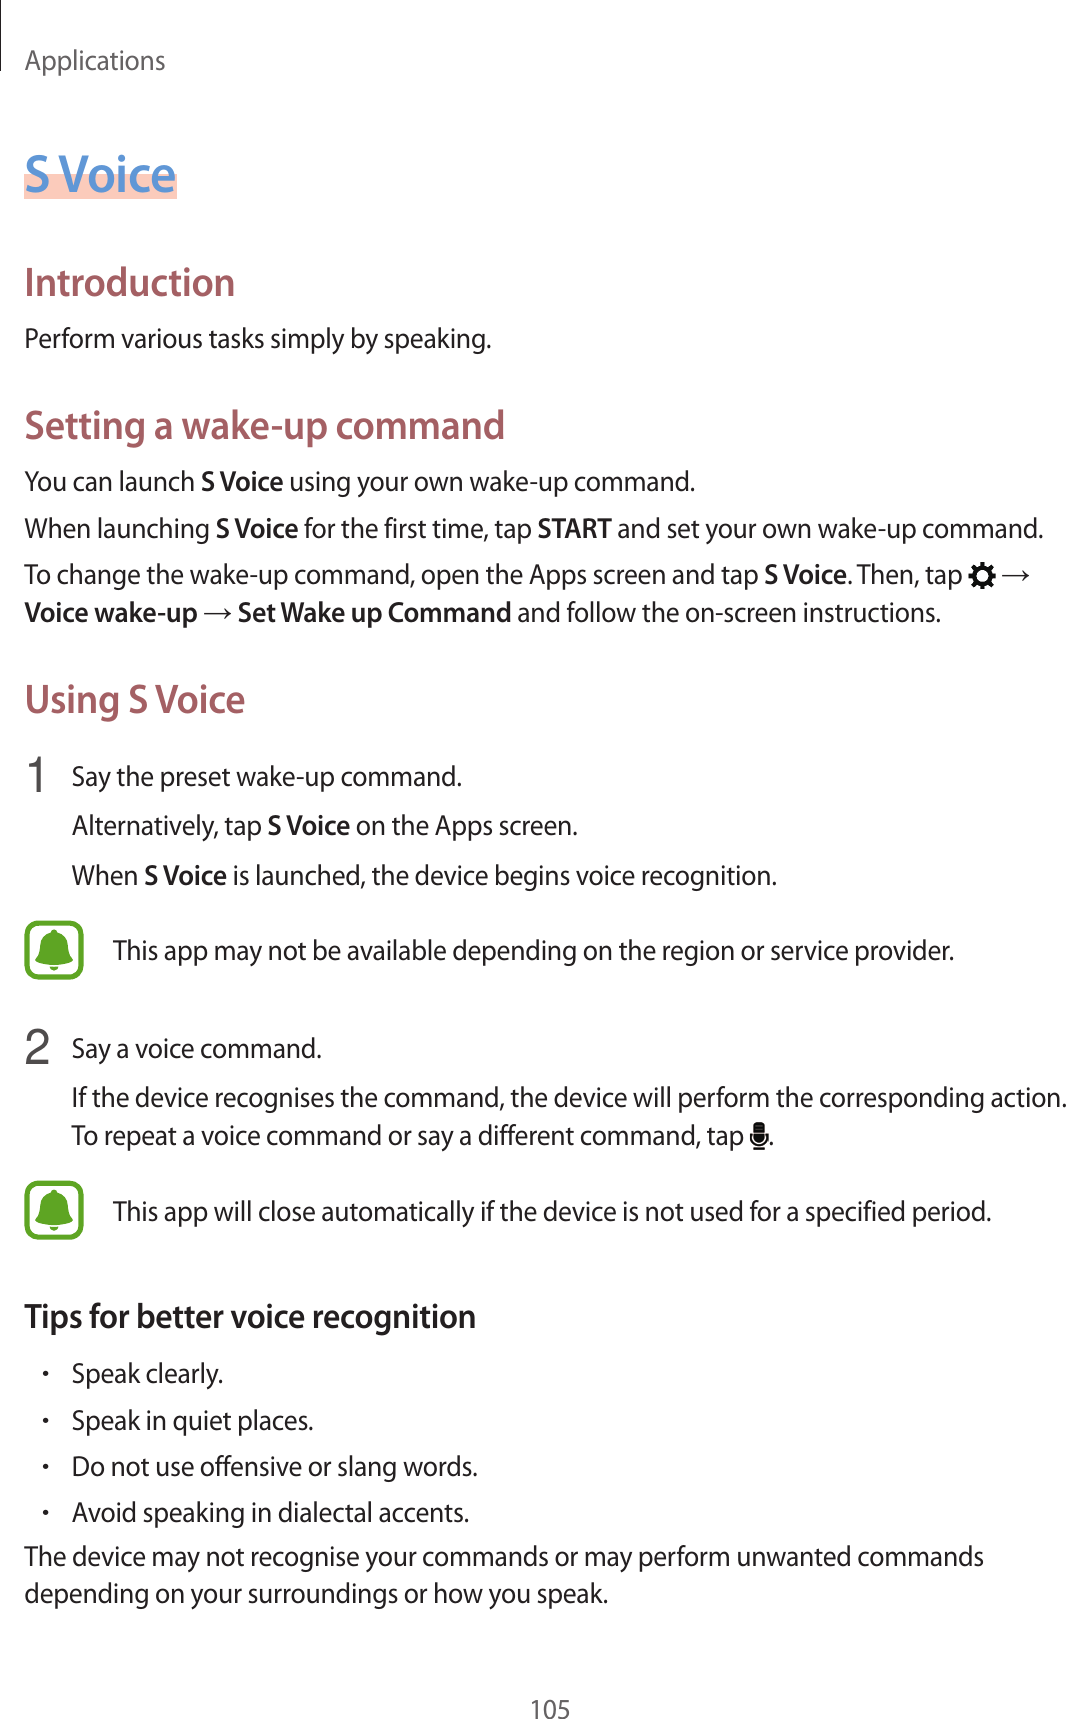 Applications105S V oiceIntroductionP erform various tasks simply by speaking.Setting a wake-up commandYou can launch S V oice using your own w ake-up command.When launching S V oice for the first time , tap START and set your own w ake-up command.To change the wake-up command, open the A pps scr een and tap S V oice. Then, tap    Voice wak e-up  Set Wake up Command and follo w the on-scr een instructions.Using S Voice1  Say the preset w ake-up command .Alternativ ely, tap S V oice on the Apps screen.When S V oice is launched, the device beg ins v oic e r ecog nition.This app may not be a vailable depending on the r eg ion or service provider.2  Say a voic e command .If the device recog nises the command , the devic e will perform the c orresponding action. To repeat a v oic e command or sa y a diff er en t command , tap  .This app will close automatically if the devic e is not used f or a specified period .T ips f or bett er v oic e r ec ognition•Speak clearly.•Speak in quiet places.•Do not use offensiv e or slang w or ds .•A v oid speaking in dialectal accen ts .The device ma y not r ecog nise y our c ommands or may perform unwant ed c ommands depending on your surroundings or ho w y ou speak.